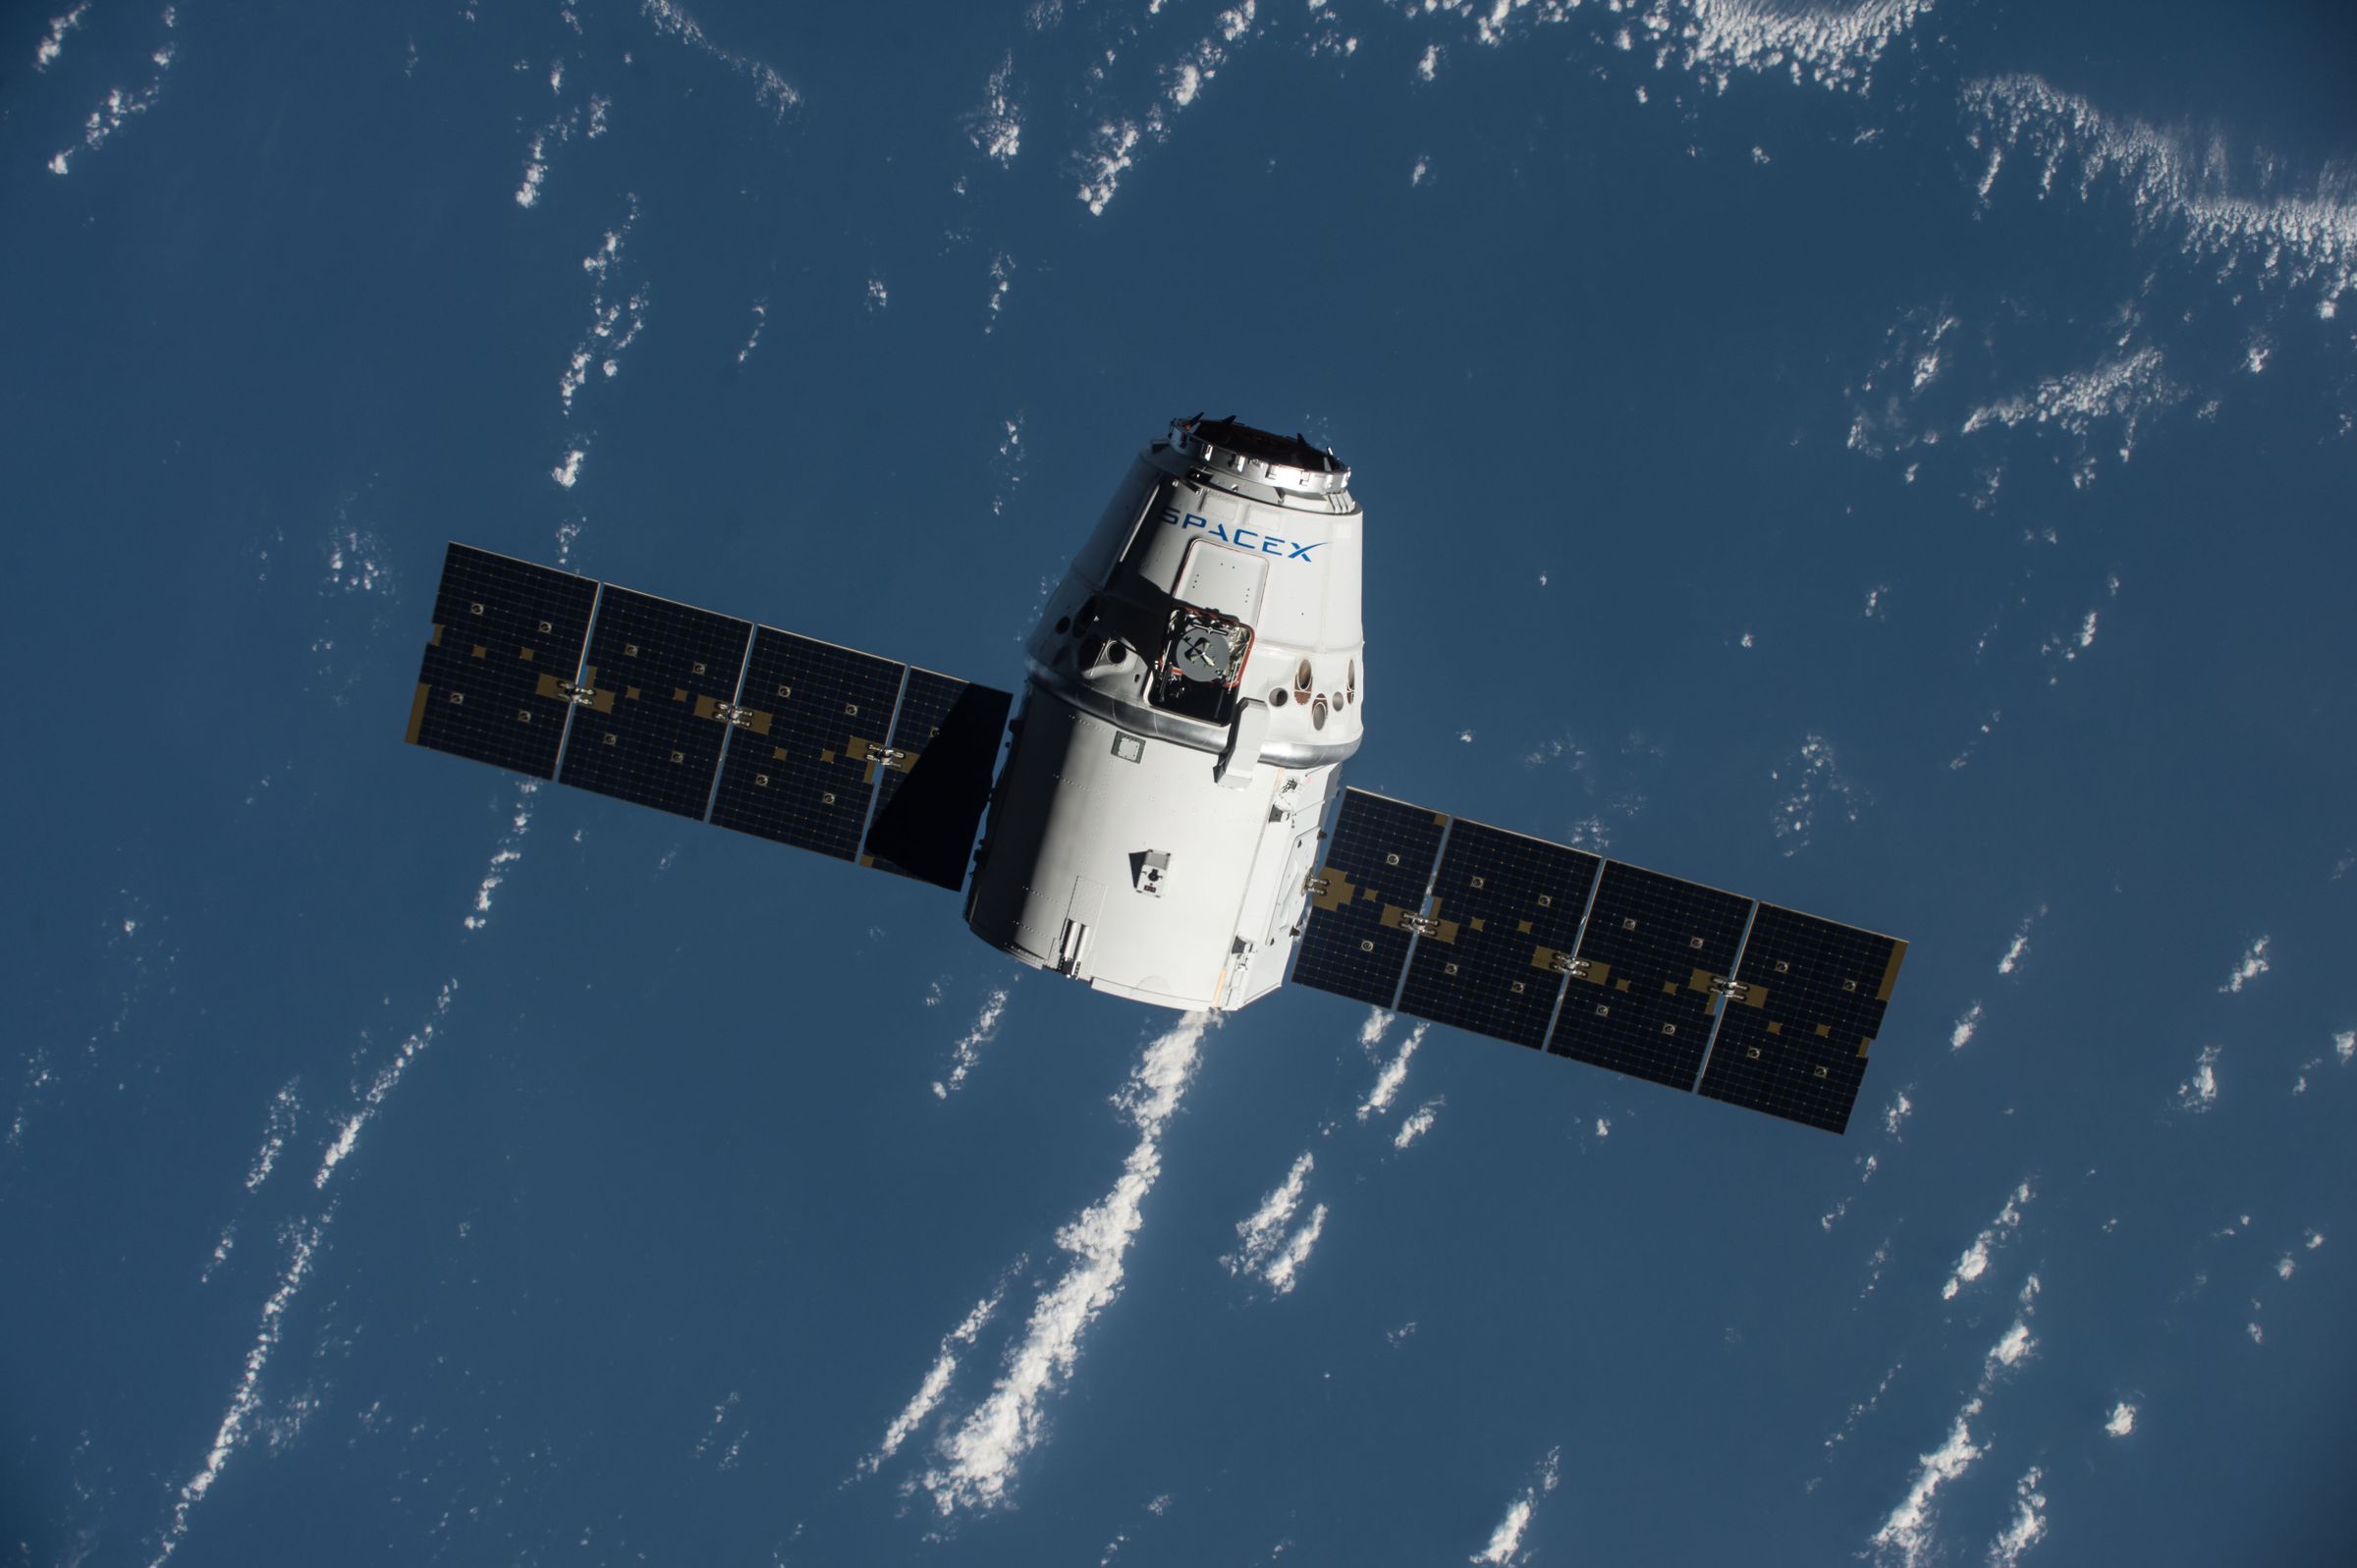 The same Dragon cargo capsule that flew to the ISS in July 2016 is going to space again